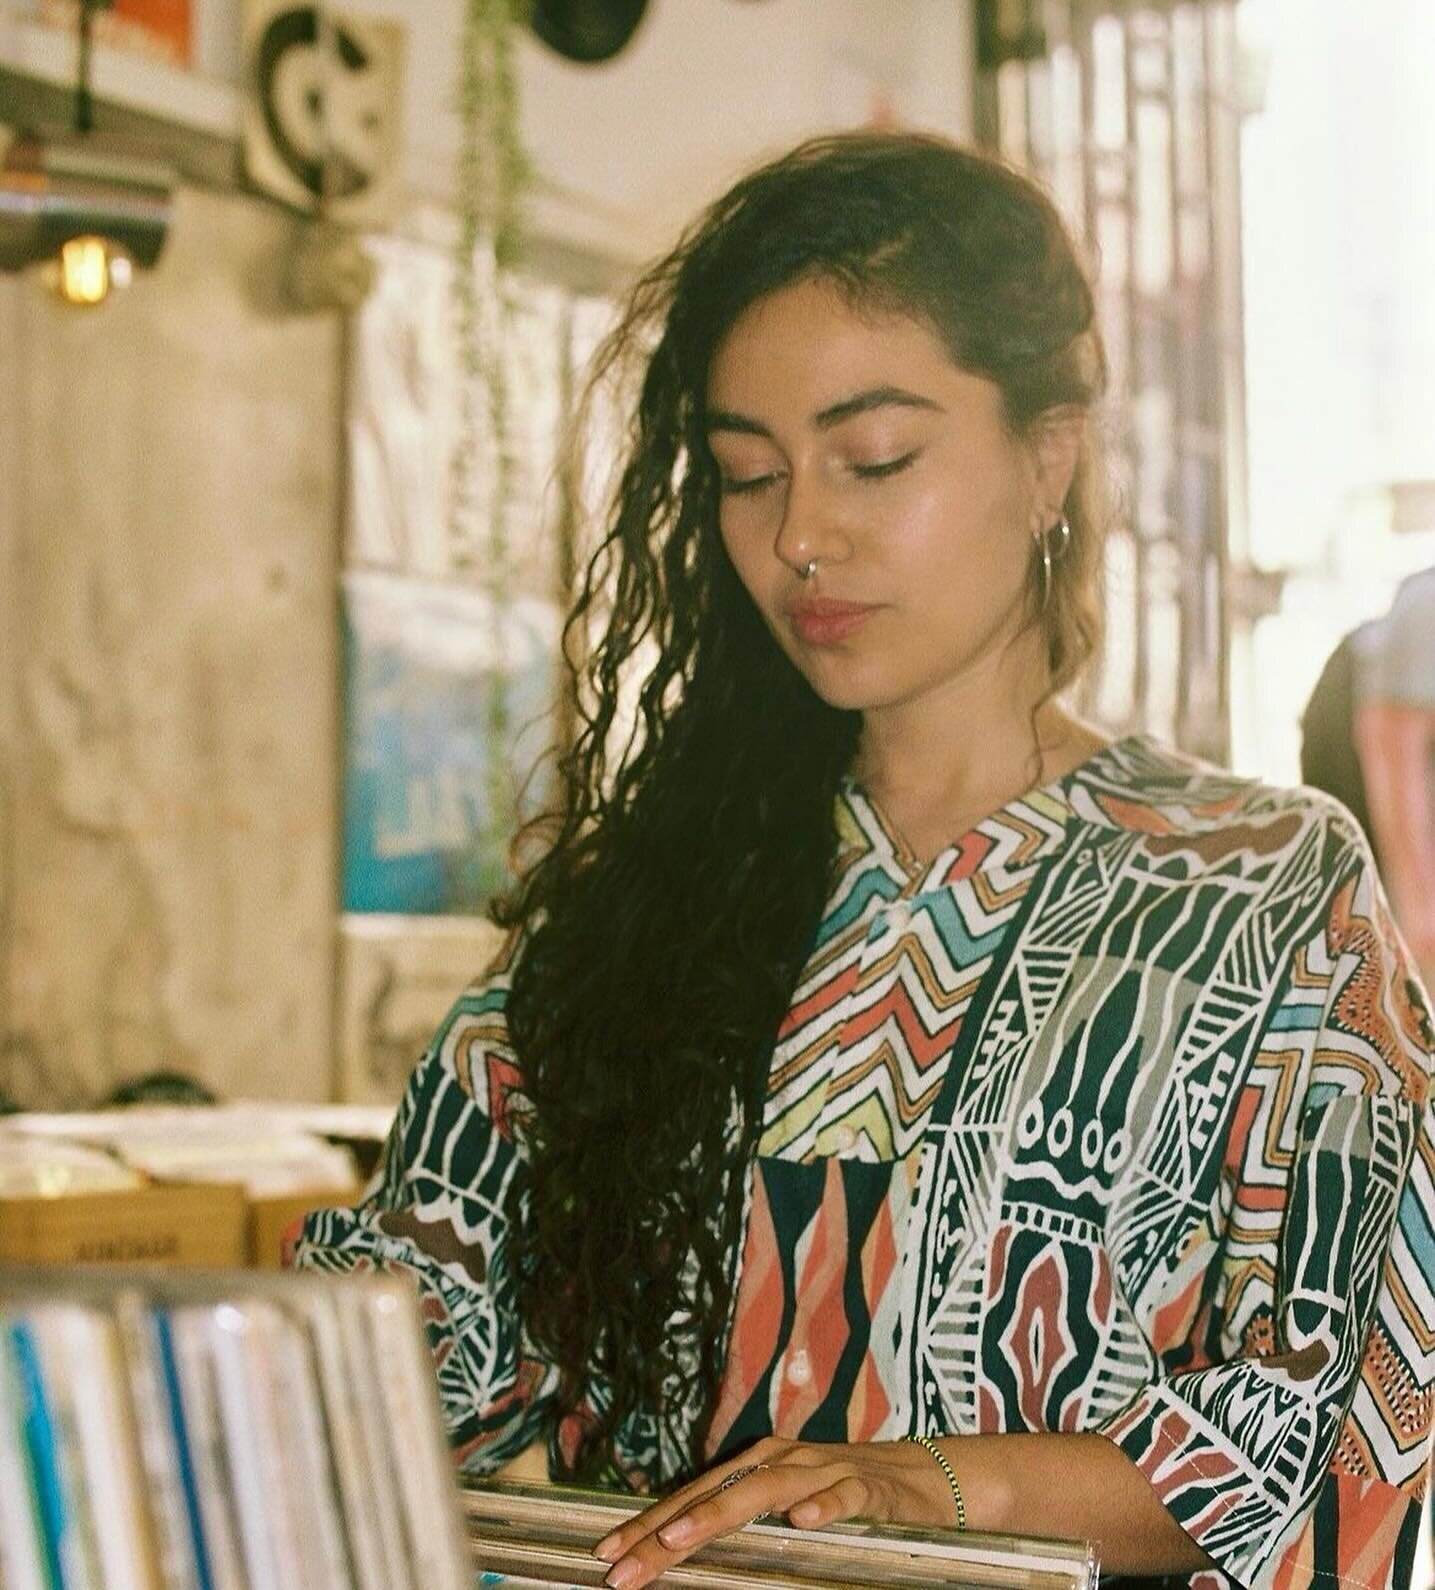 We&rsquo;re excited to welcome Cuban DJ and selector for a warming evening of good vibes. 

Cami Lay&eacute; Ok&uacute;n is a Cuban DJ/selector inspired by the worldwide cultural diversity of rhythms. She collects vinyl records from all over the worl